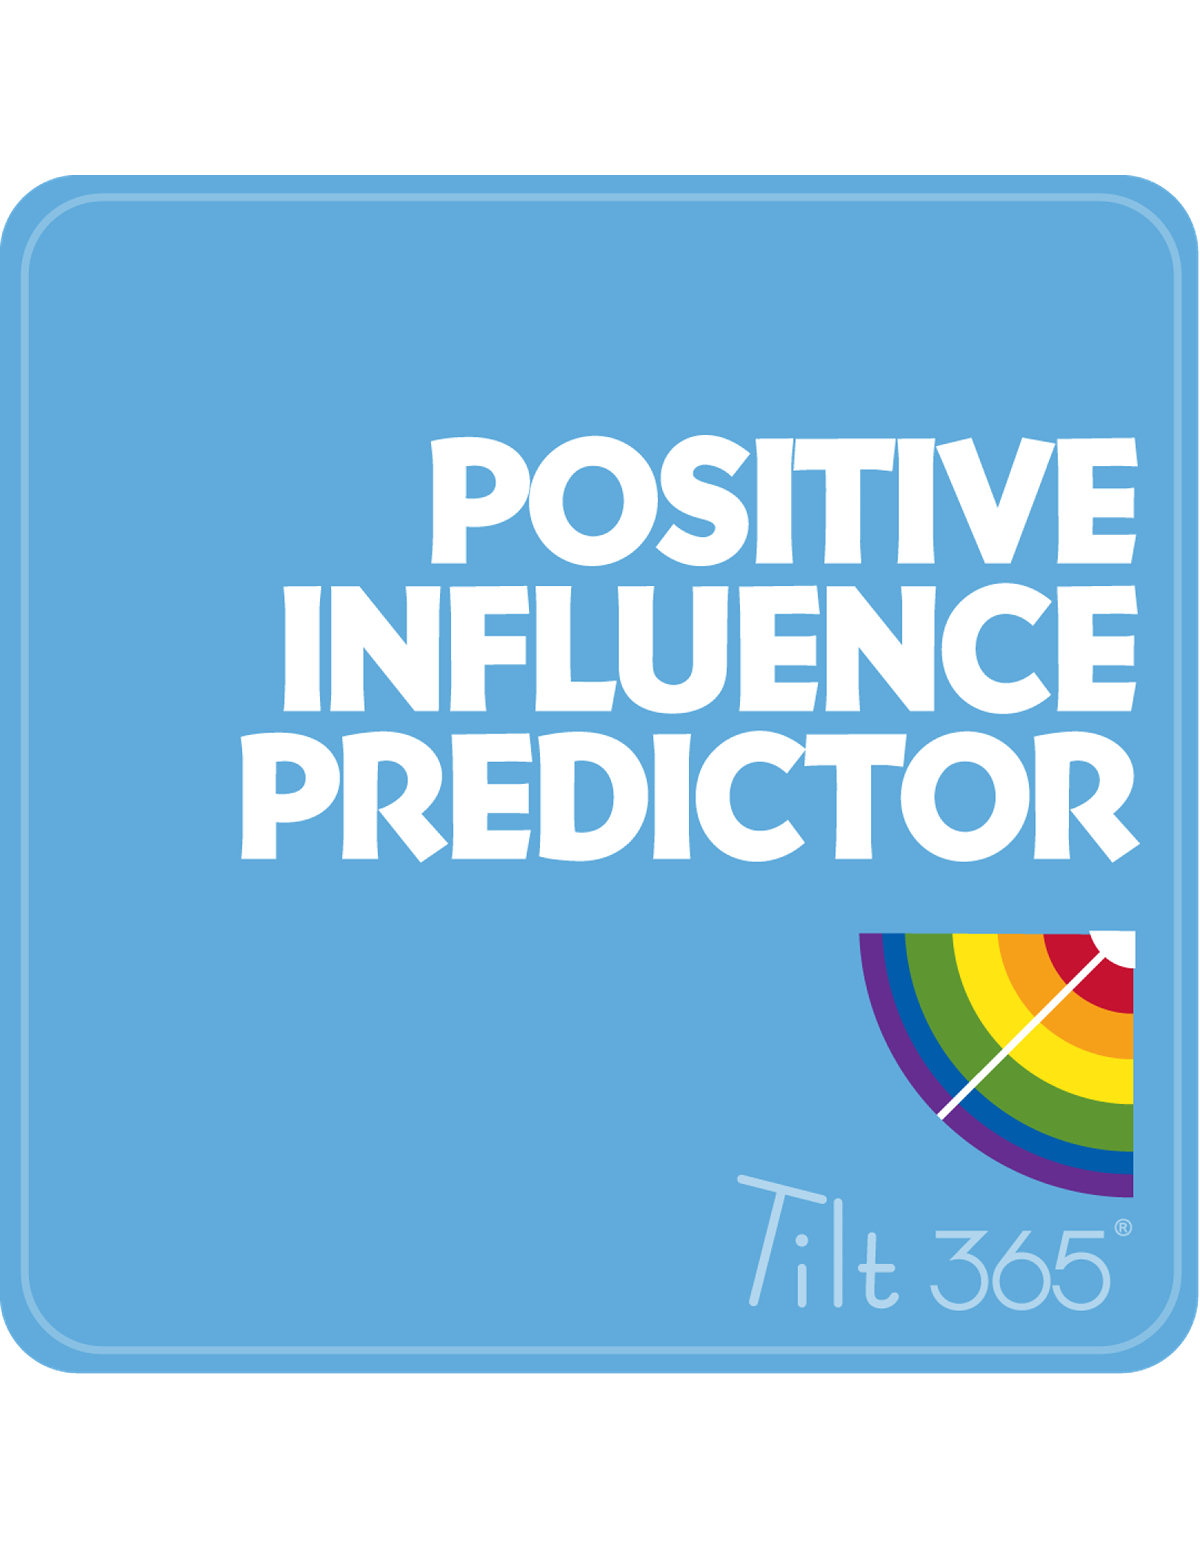 2021 Evaluation of the Positive Influence Predictor